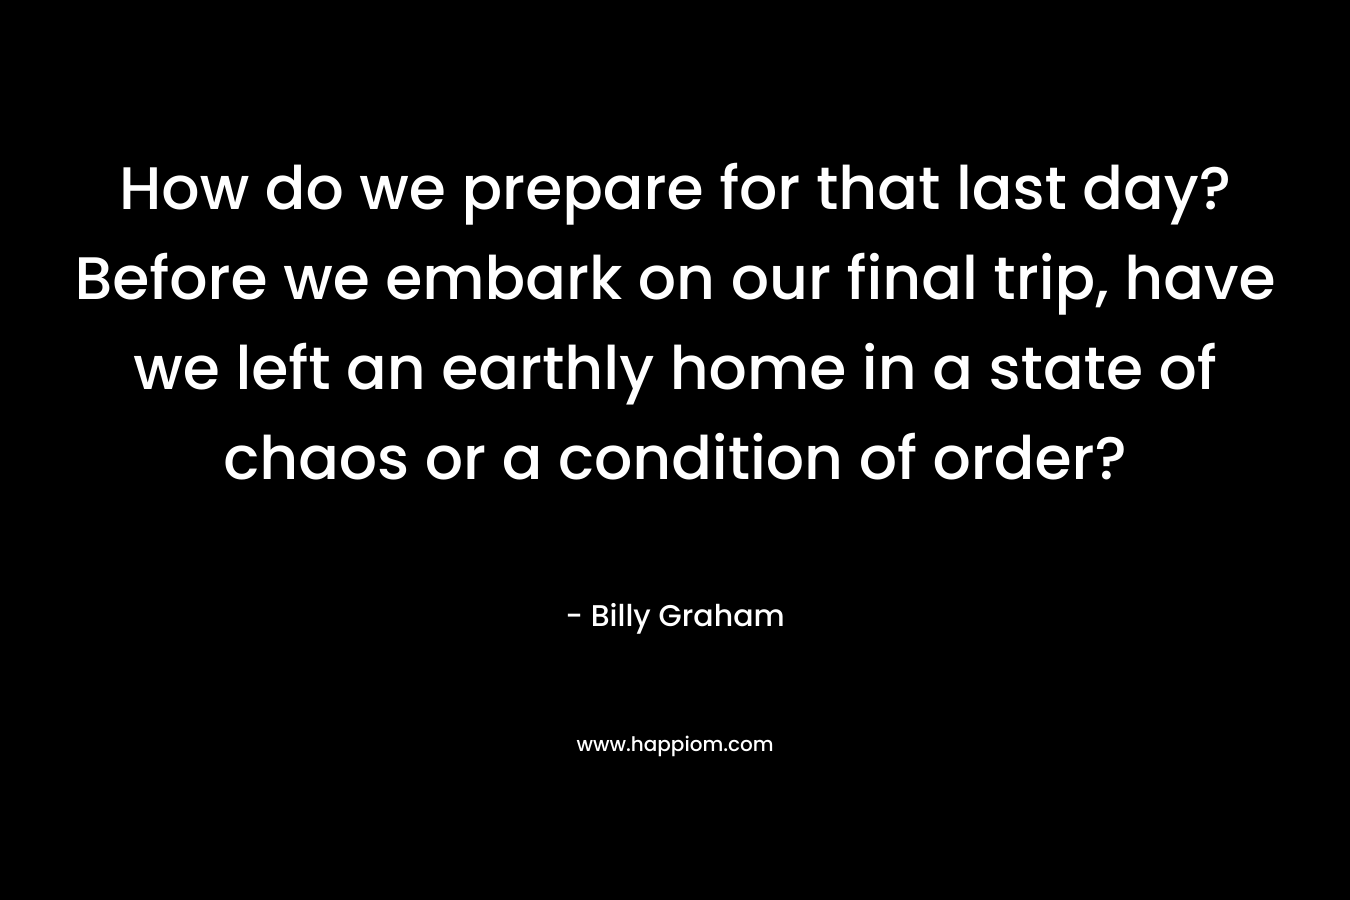 How do we prepare for that last day? Before we embark on our final trip, have we left an earthly home in a state of chaos or a condition of order?